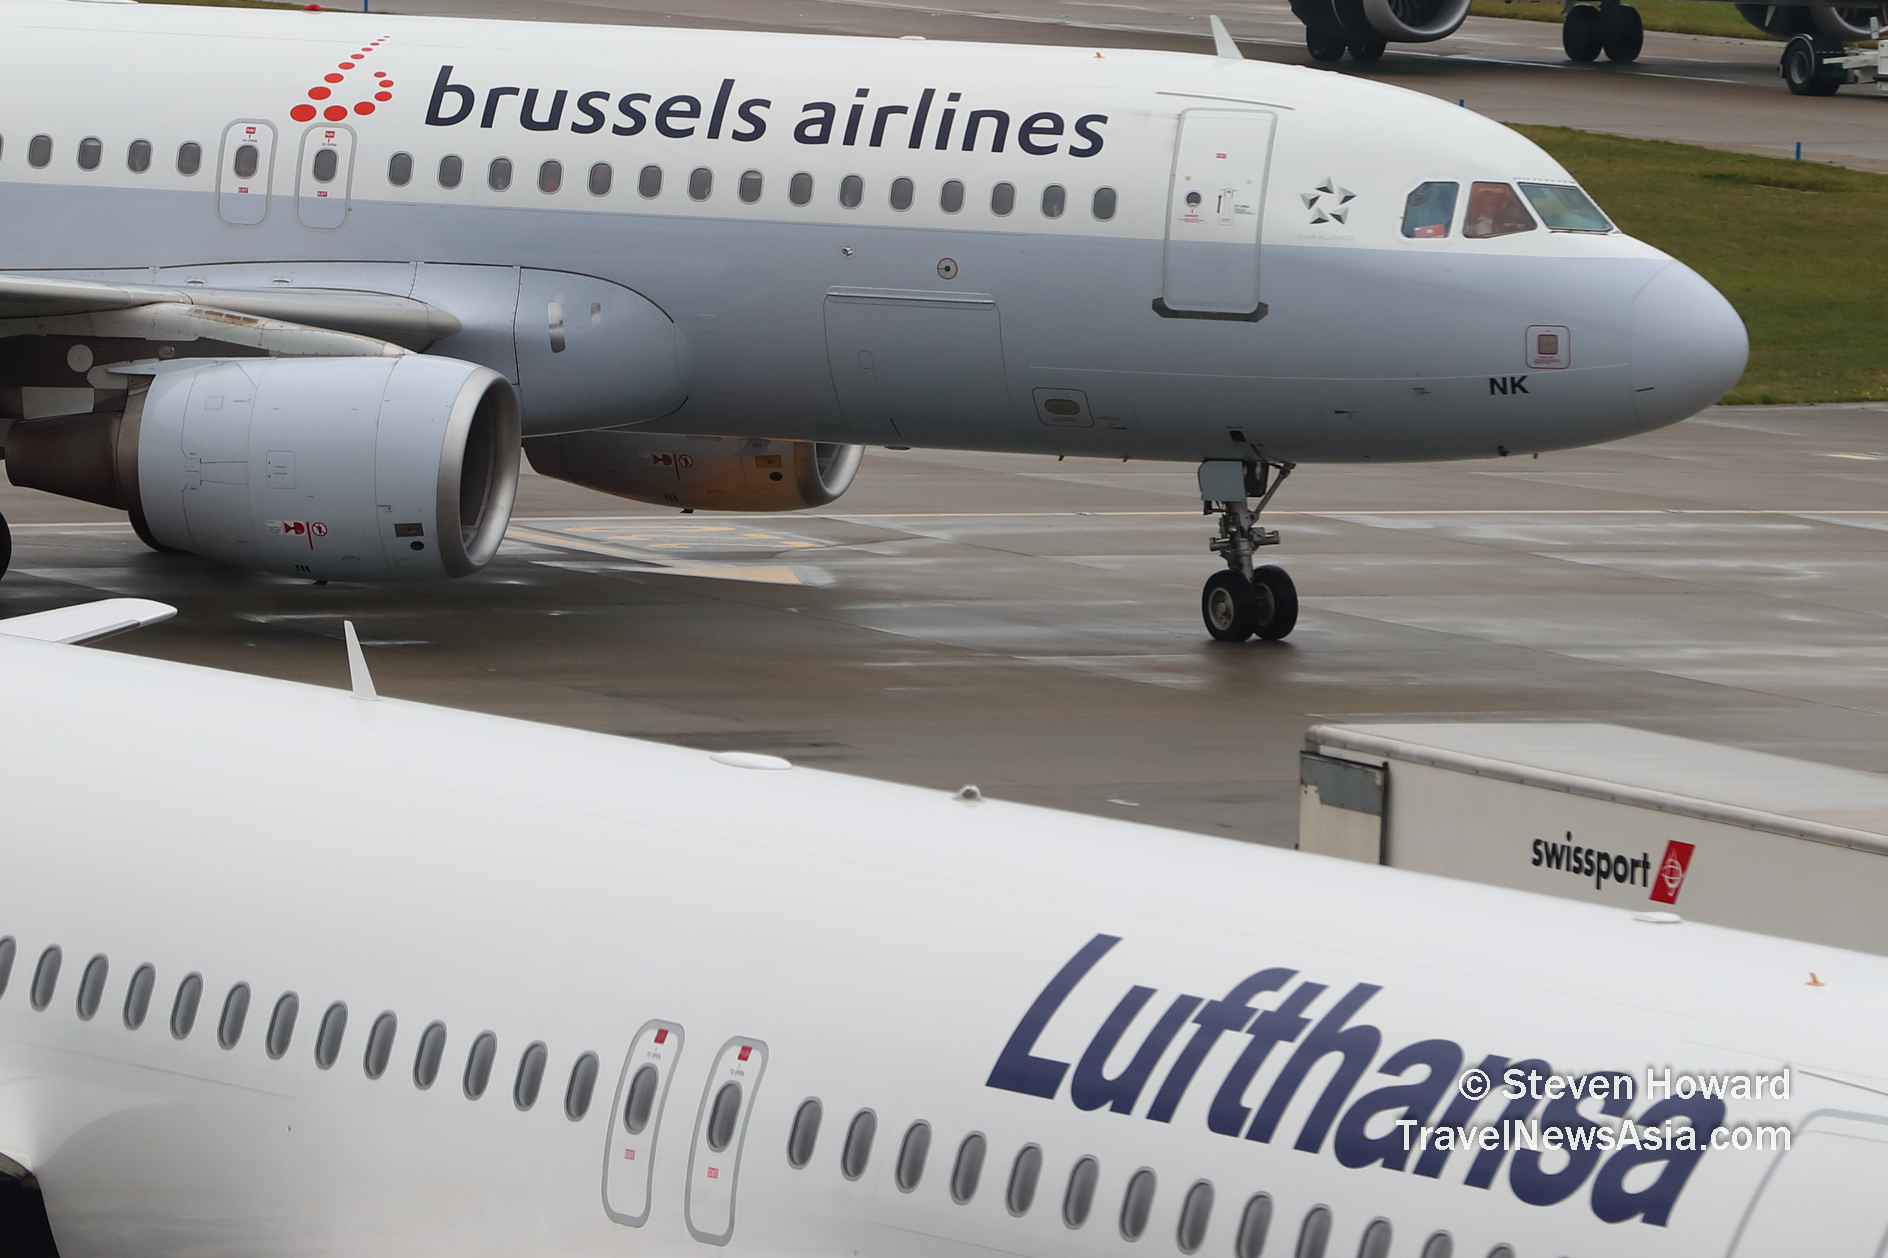 Brussels Airlines and Lufthansa aircraft. Picture by Steven Howard of TravelNewsAsia.com Click to enlarge.